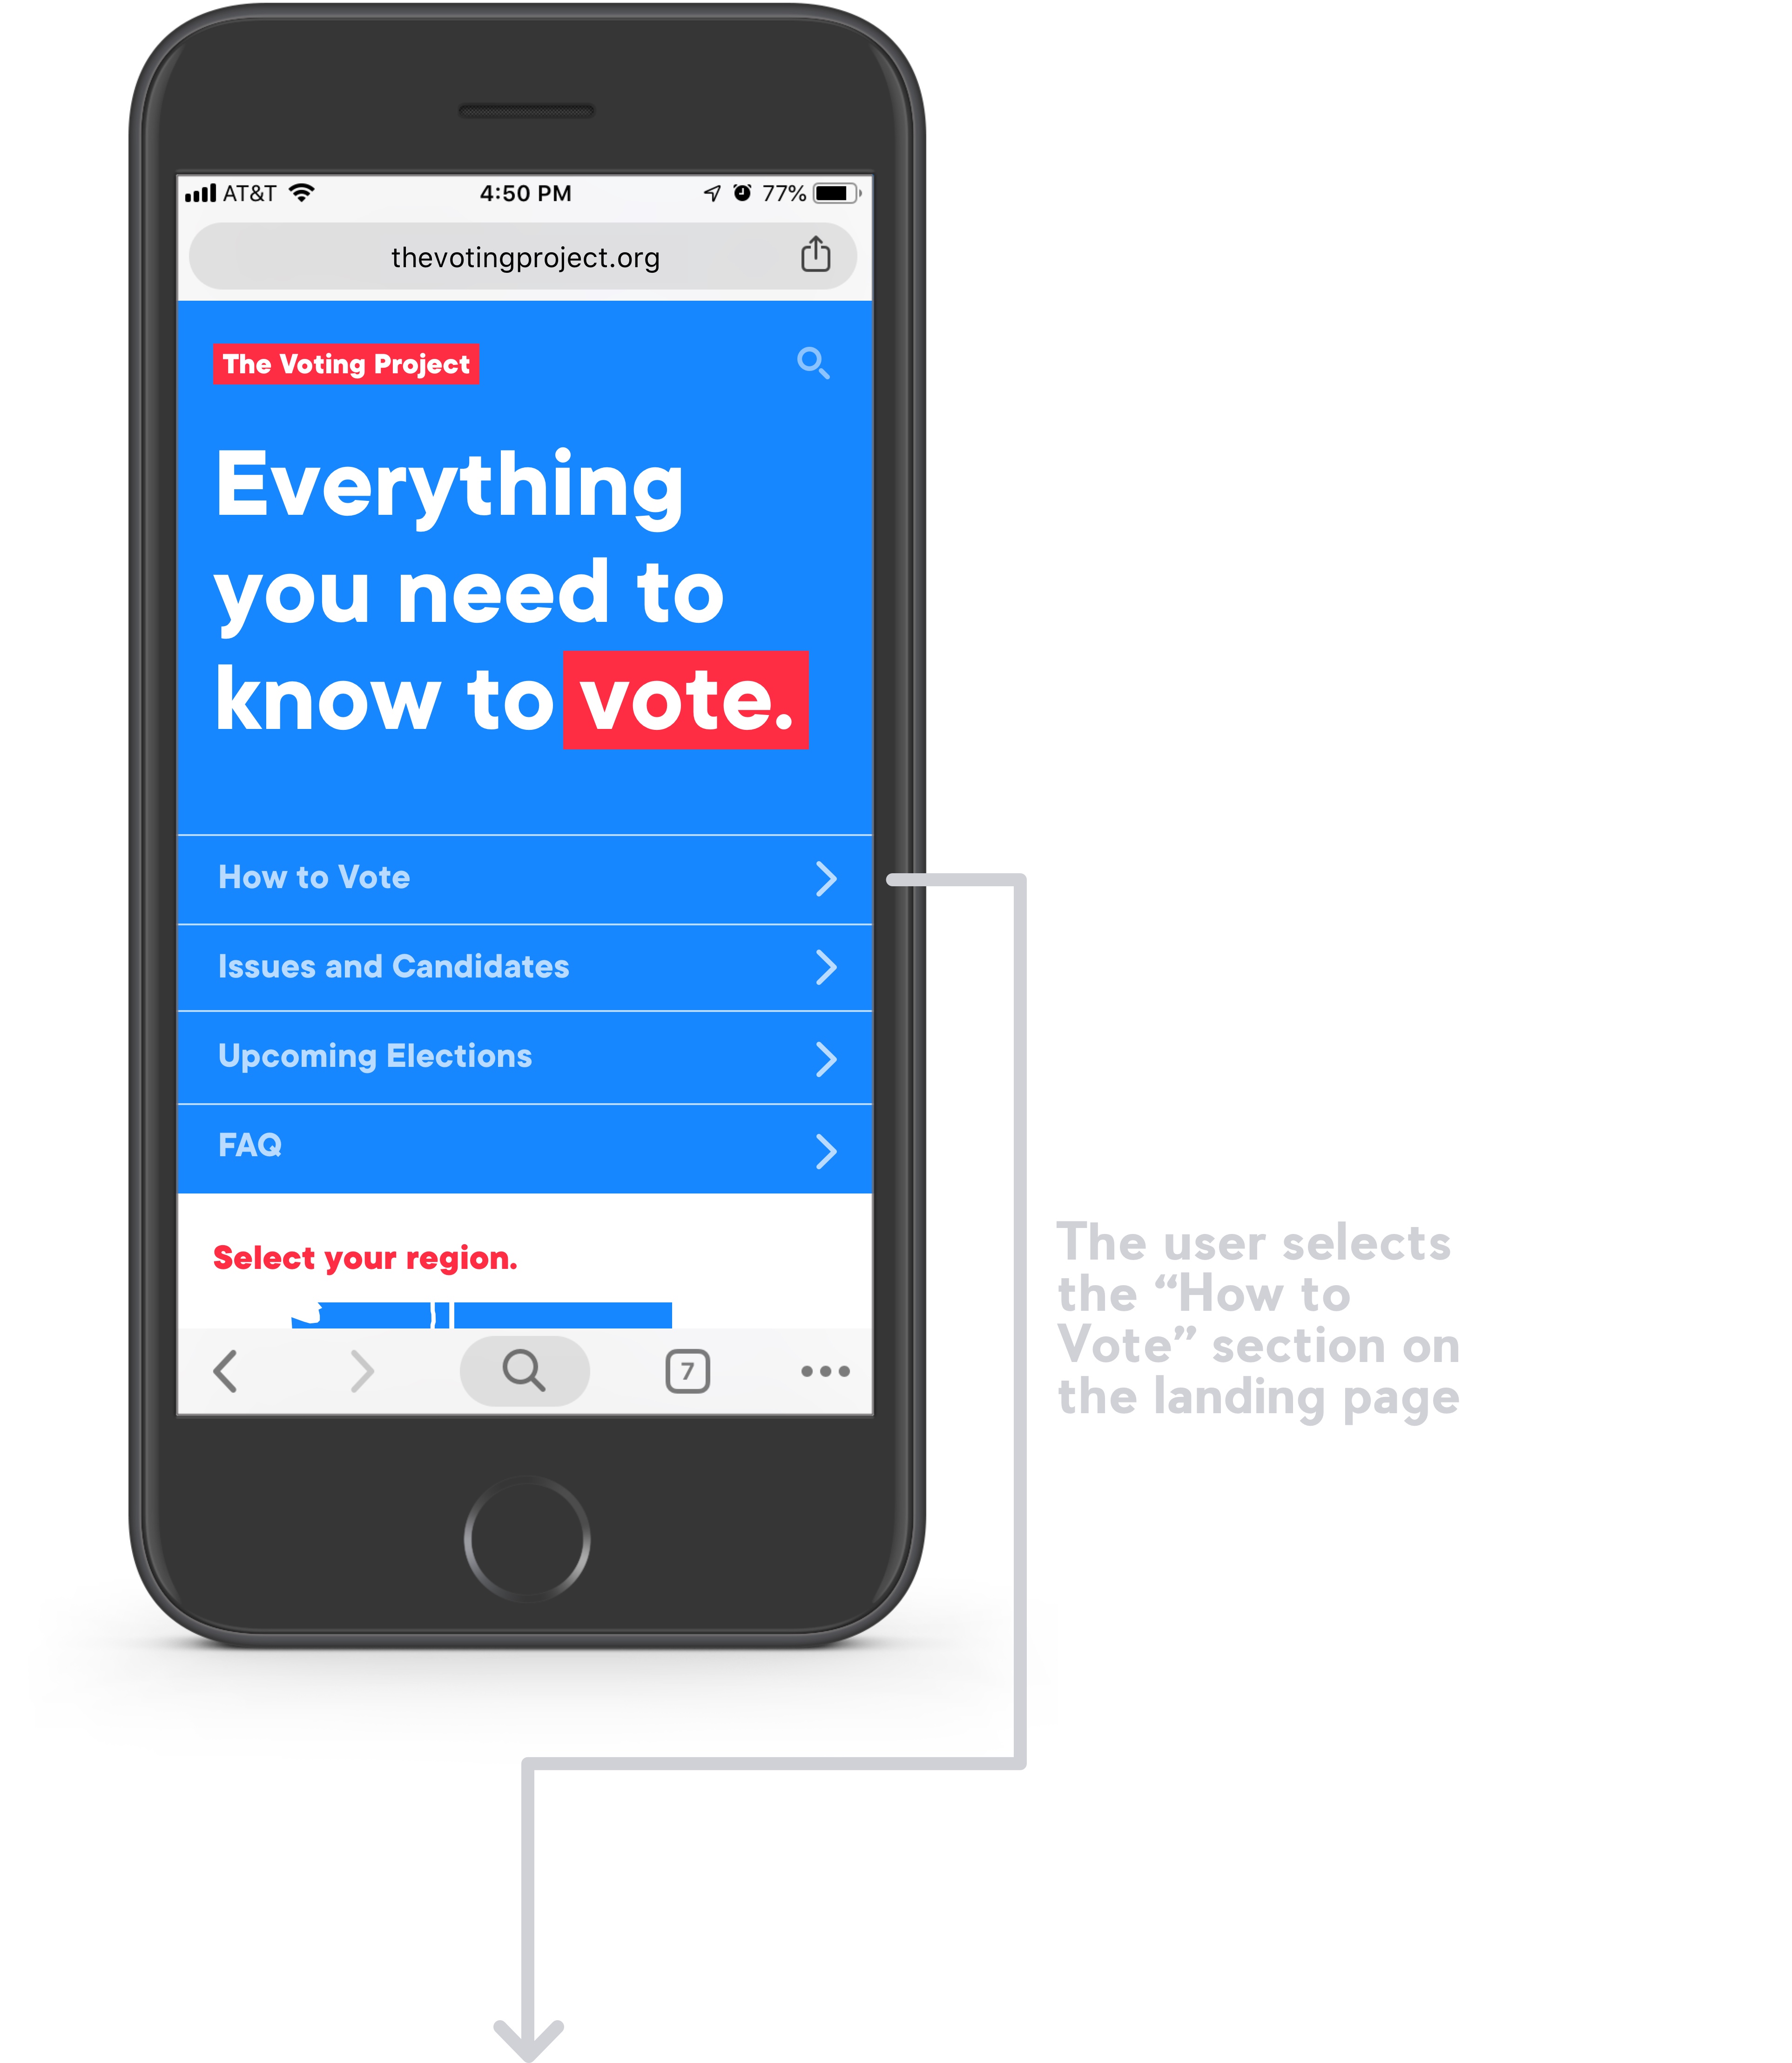 The voting project landing page